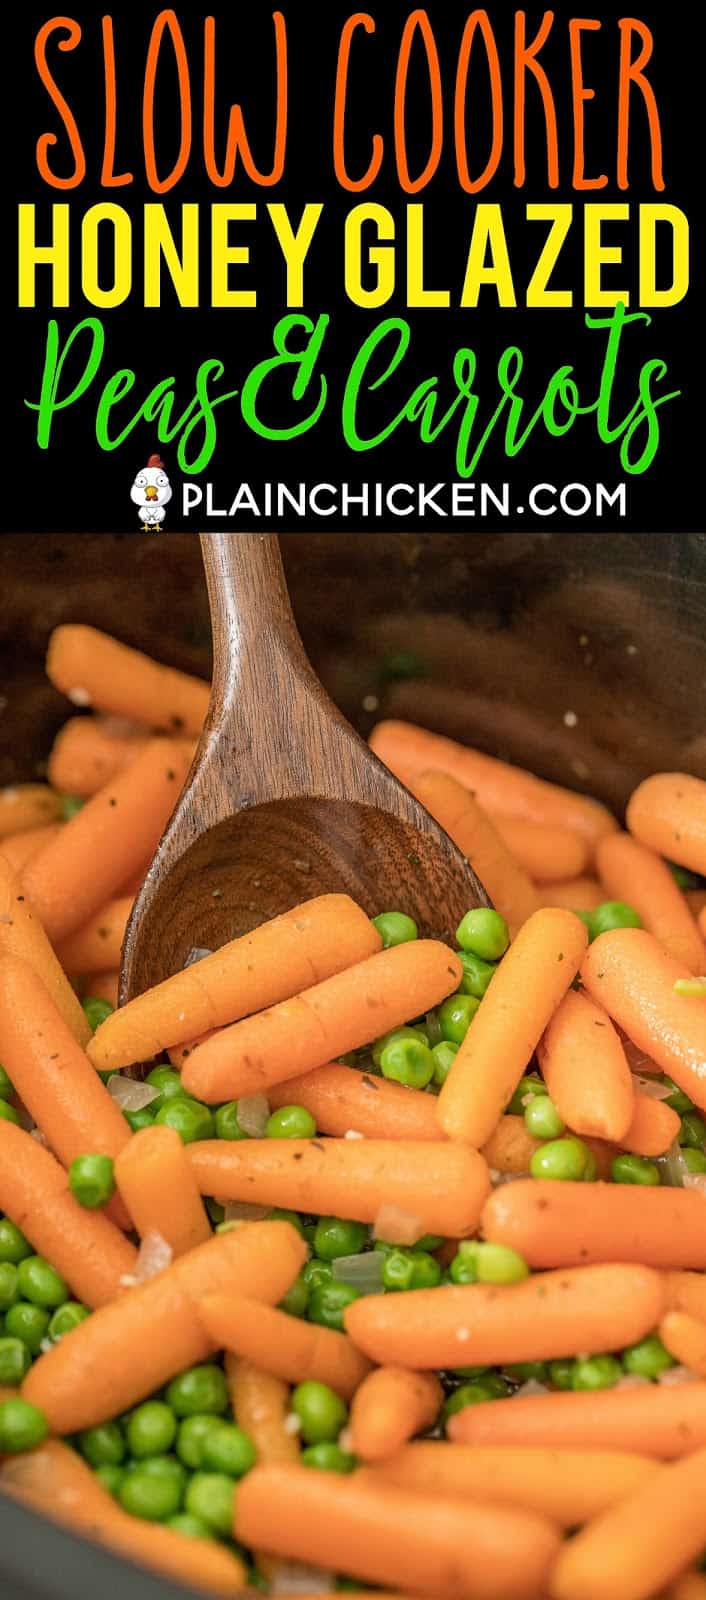 Slow Cooker Honey Glazed Peas and Carrots - easy and delicious side dish! Baby carrots, honey, butter, garlic, onion, marjoram, and peas. Amazing flavor!! Great side dish for your holiday meal! #slowcooker #sidedish #vegetables